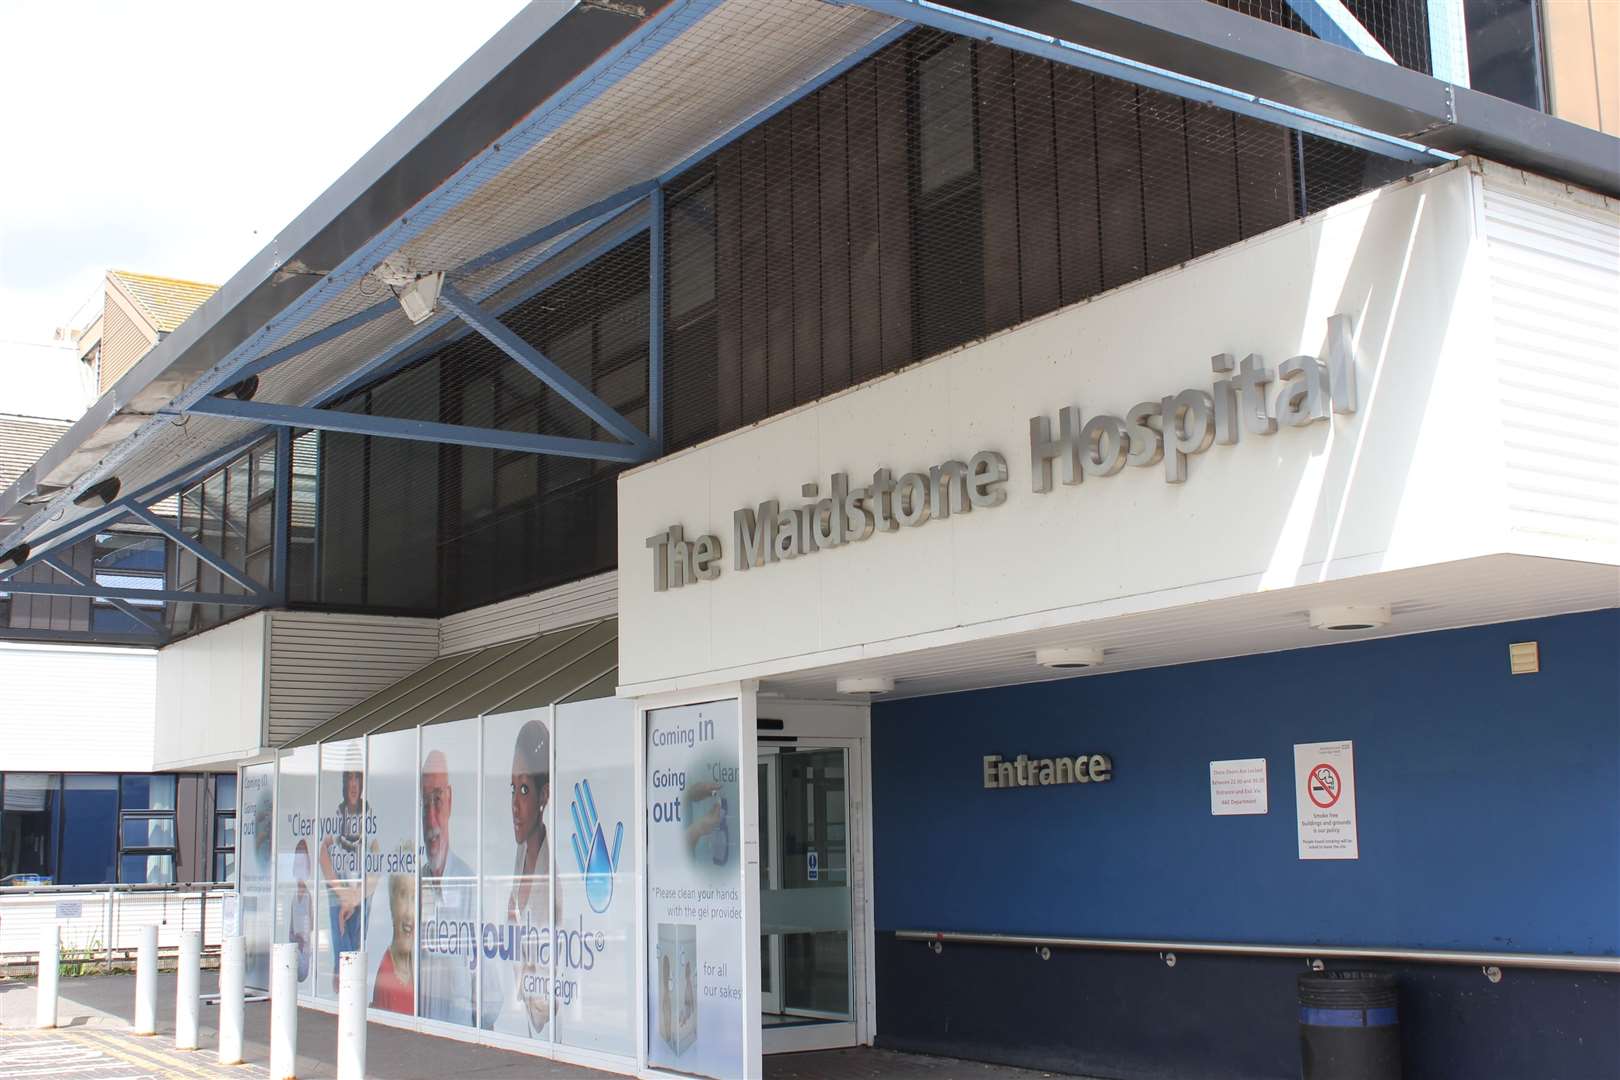 Every single adult general and acute bed at Maidstone Hospital has been filled on at least three days since Christmas